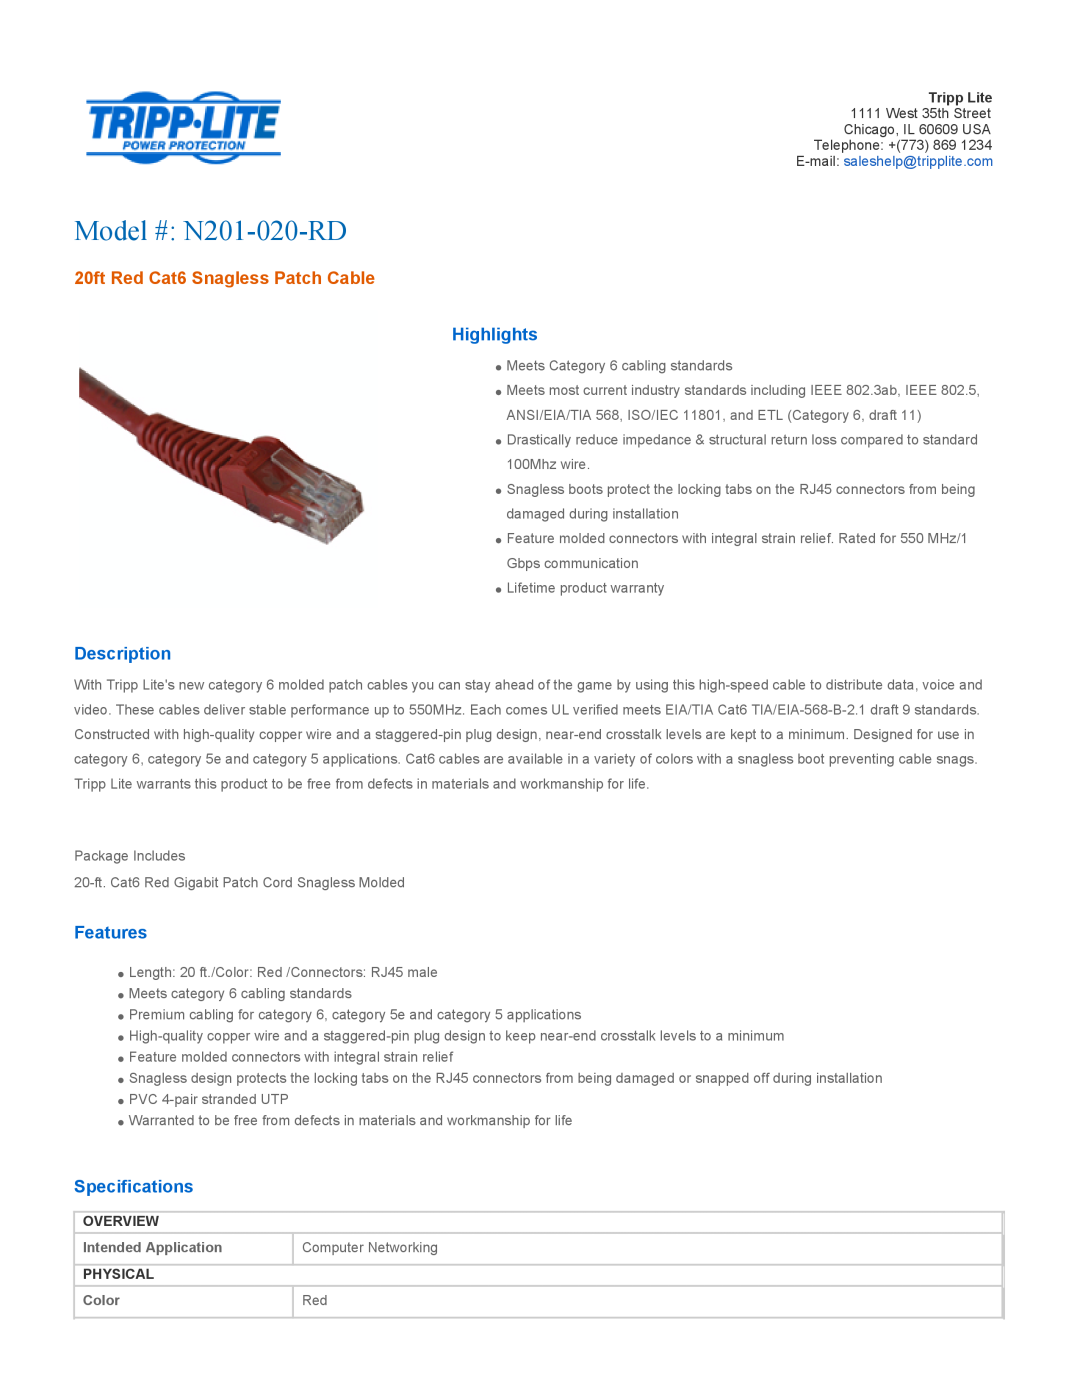 Tripp Lite N201-020-RD specifications Overview, Intended Application, Computer Networking, Physical, Color, Highlights 